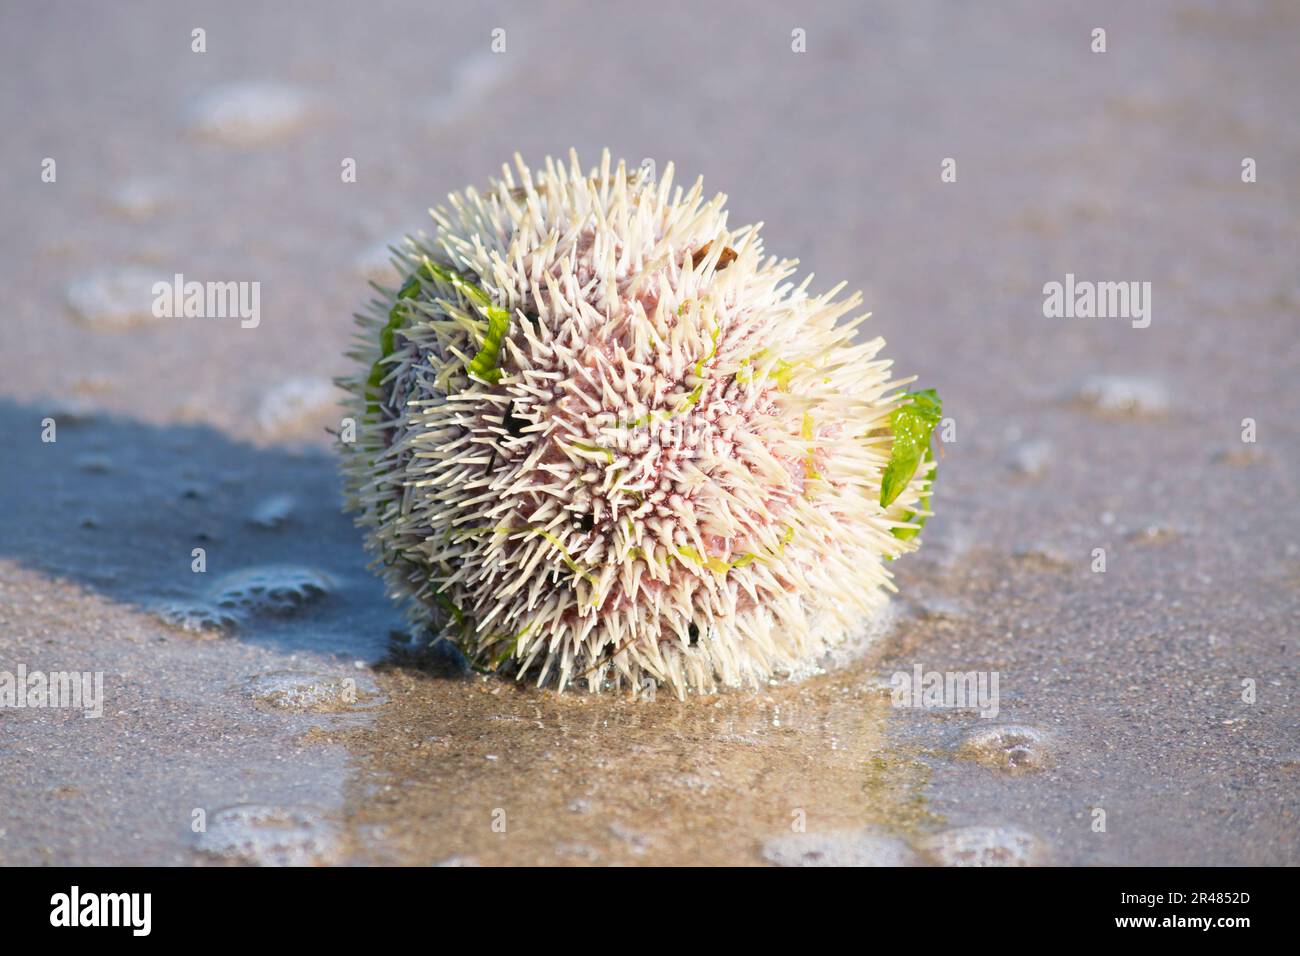 Sea Urchin washed up on the shore Stock Photo